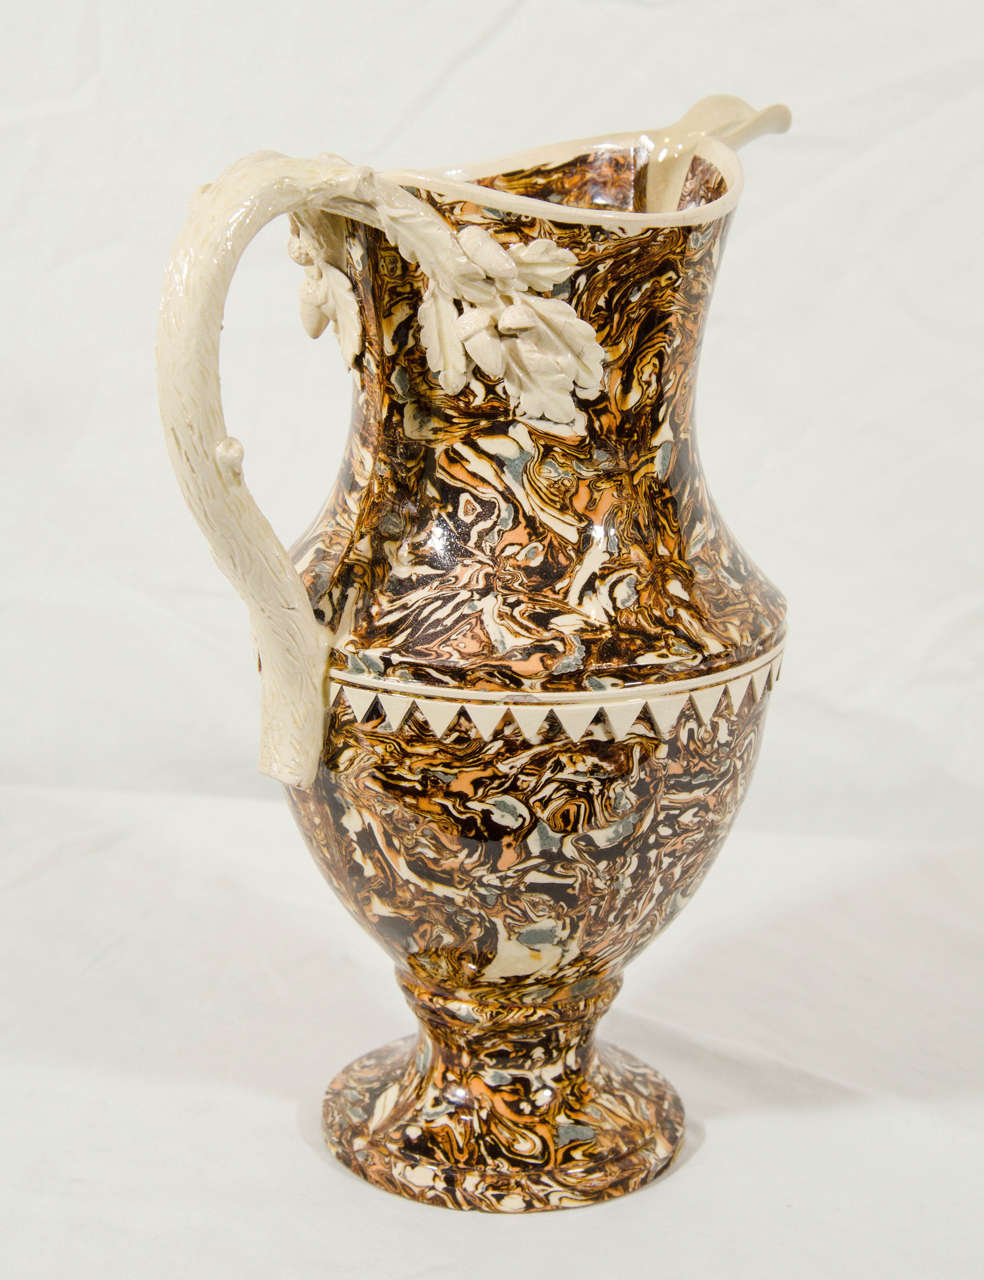 A French, mixed earths, Apt ware pitcher decorated with brown, black and cream colored earthenware (terre mêlée). The tight multicolored patterns were formed by wedging colored clays together, cutting and rolling them like pastry, before molding